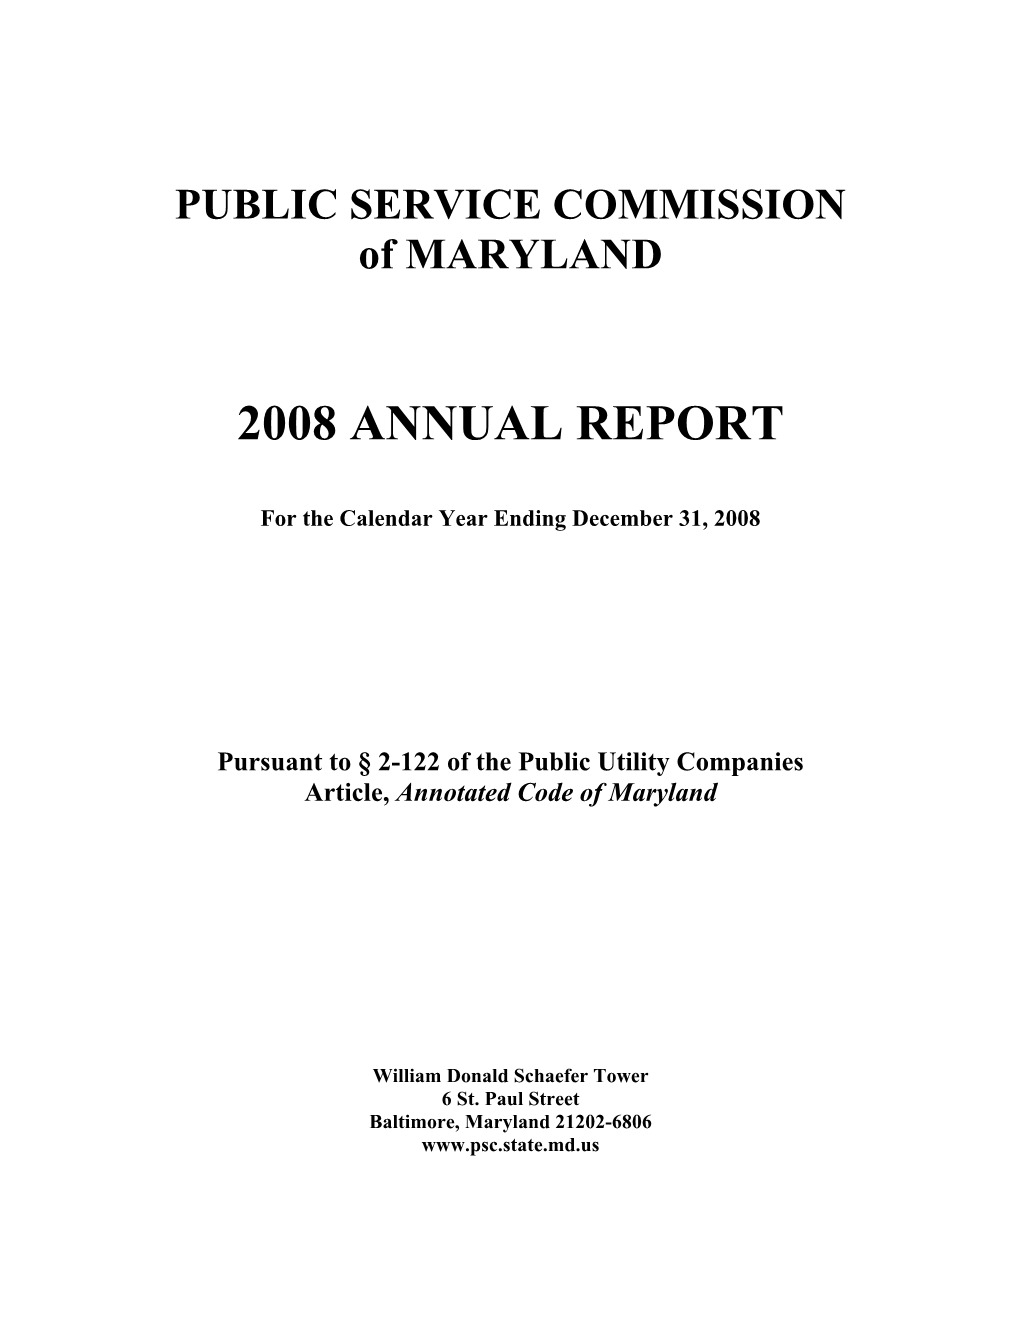 2008 MD PSC Annual Report